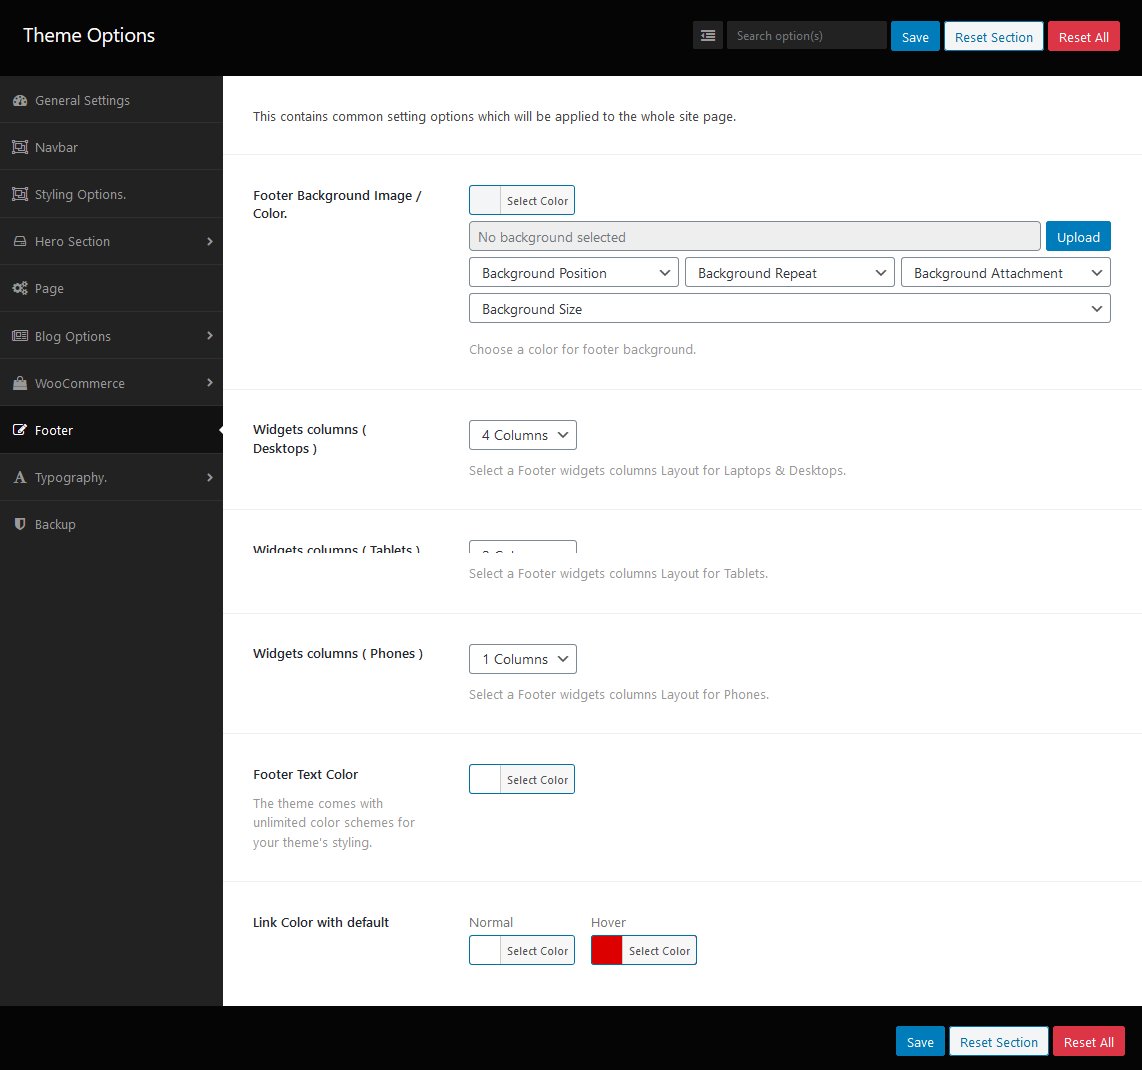 Dashboard of Footer Options